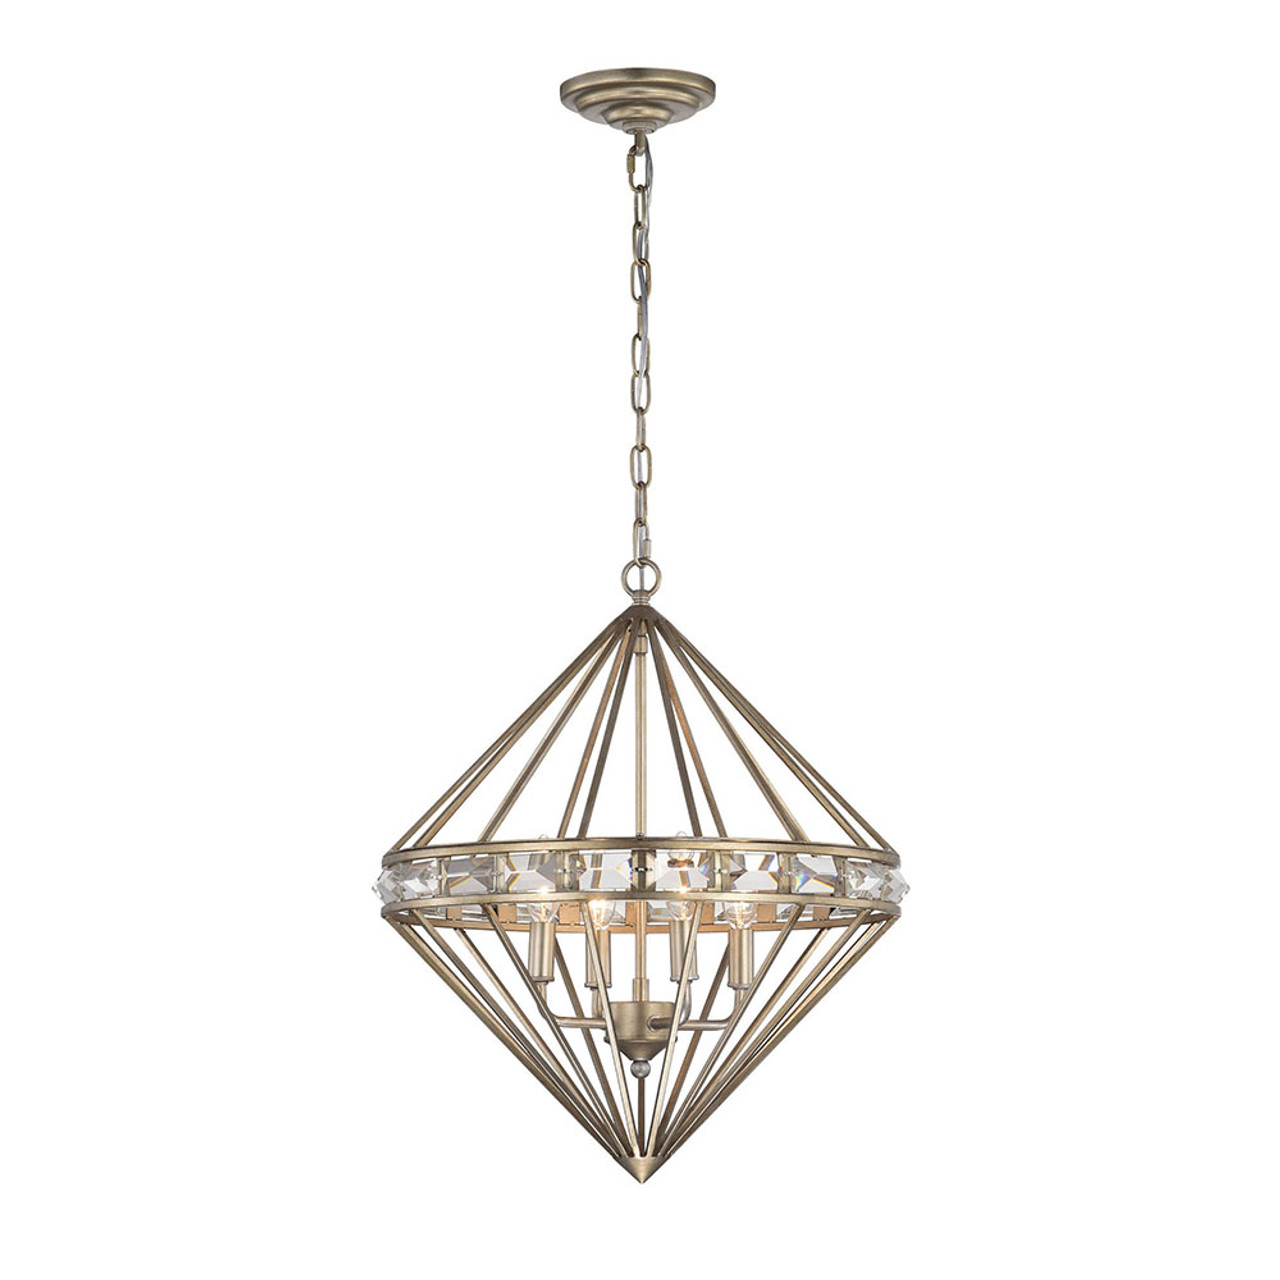 WAREHOUSE OF TIFFANY'S HM187/4AS Mayne 18 in. 4-Light Indoor Aged Silver Finish Chandelier with Light Kit